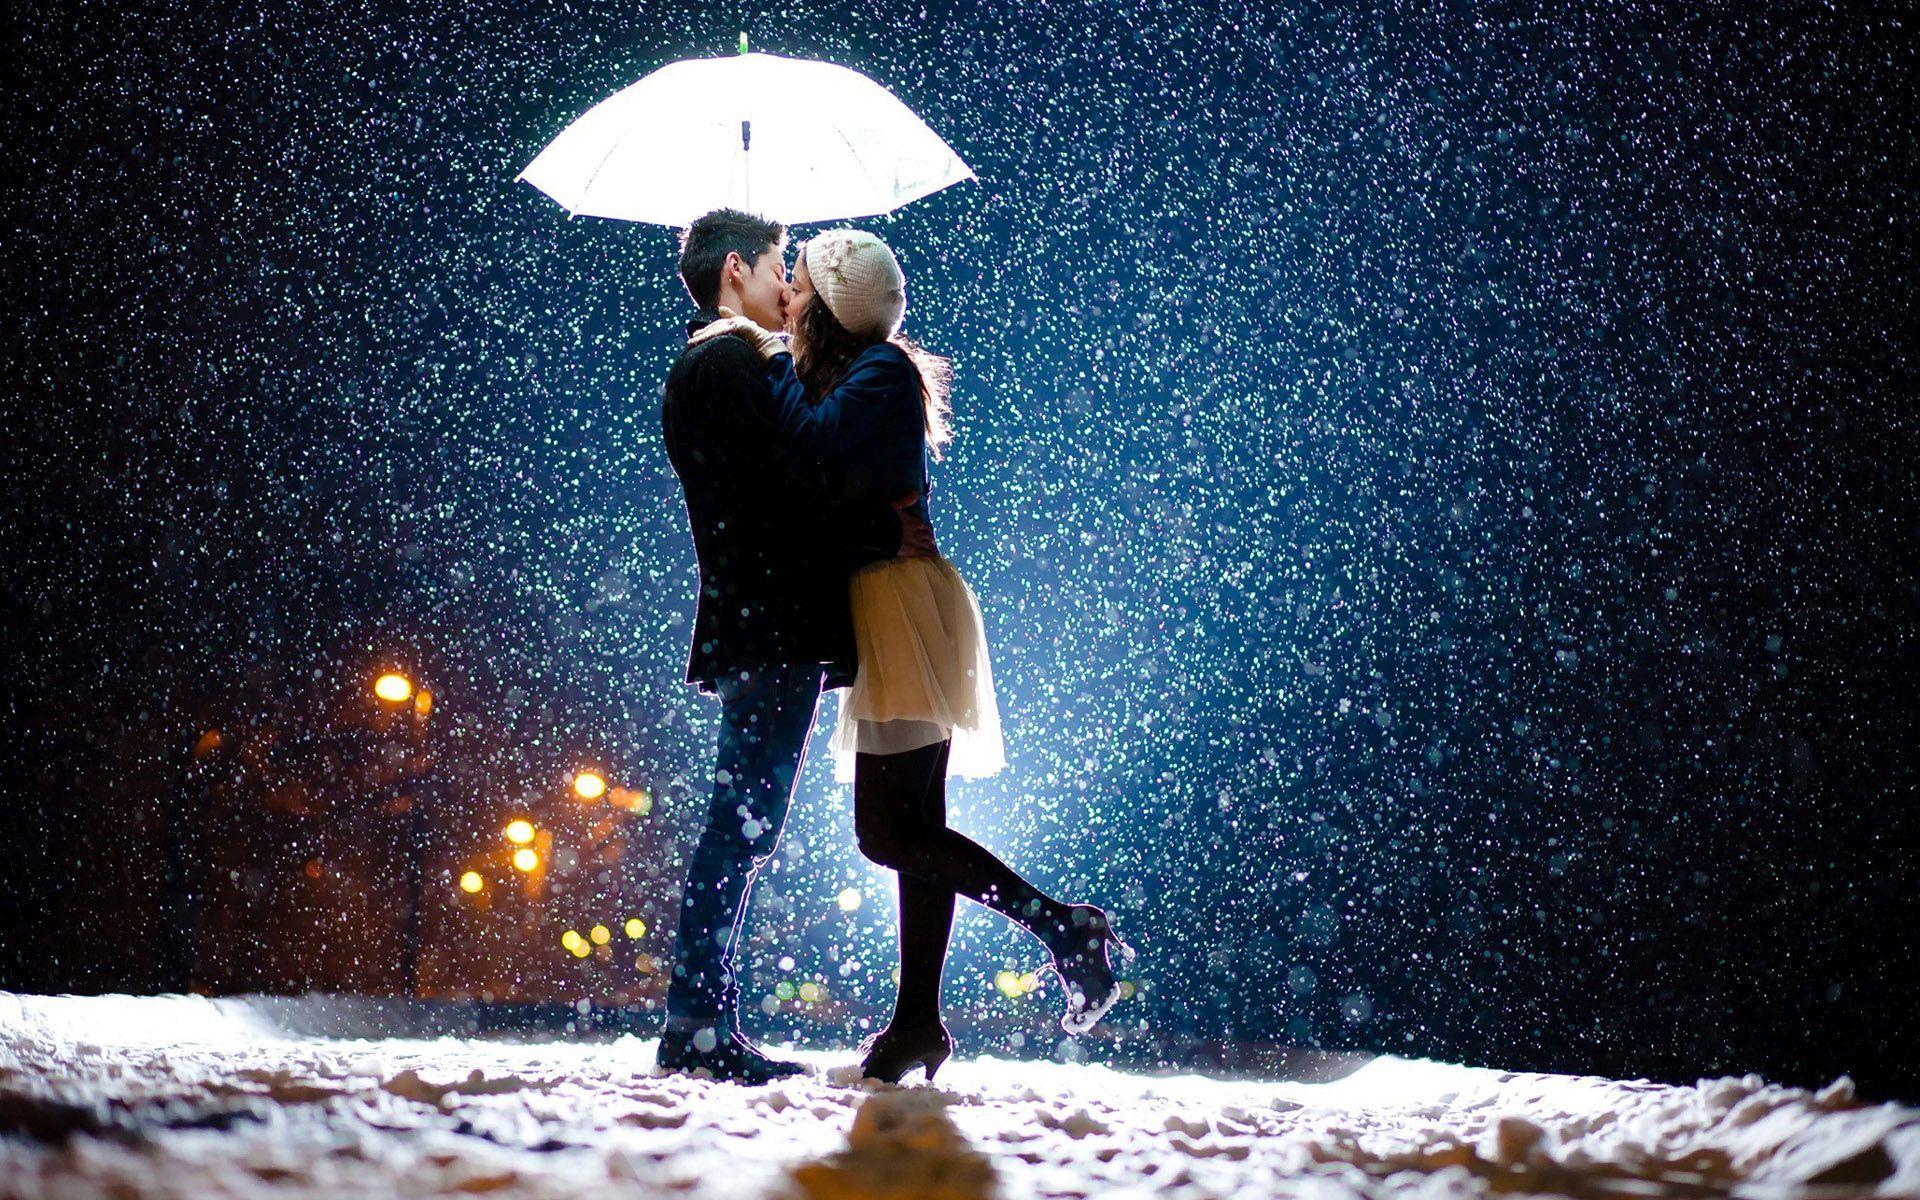 Kissing In The Snowfall - Romantic Love Couple In Rain Quotes - HD Wallpaper 